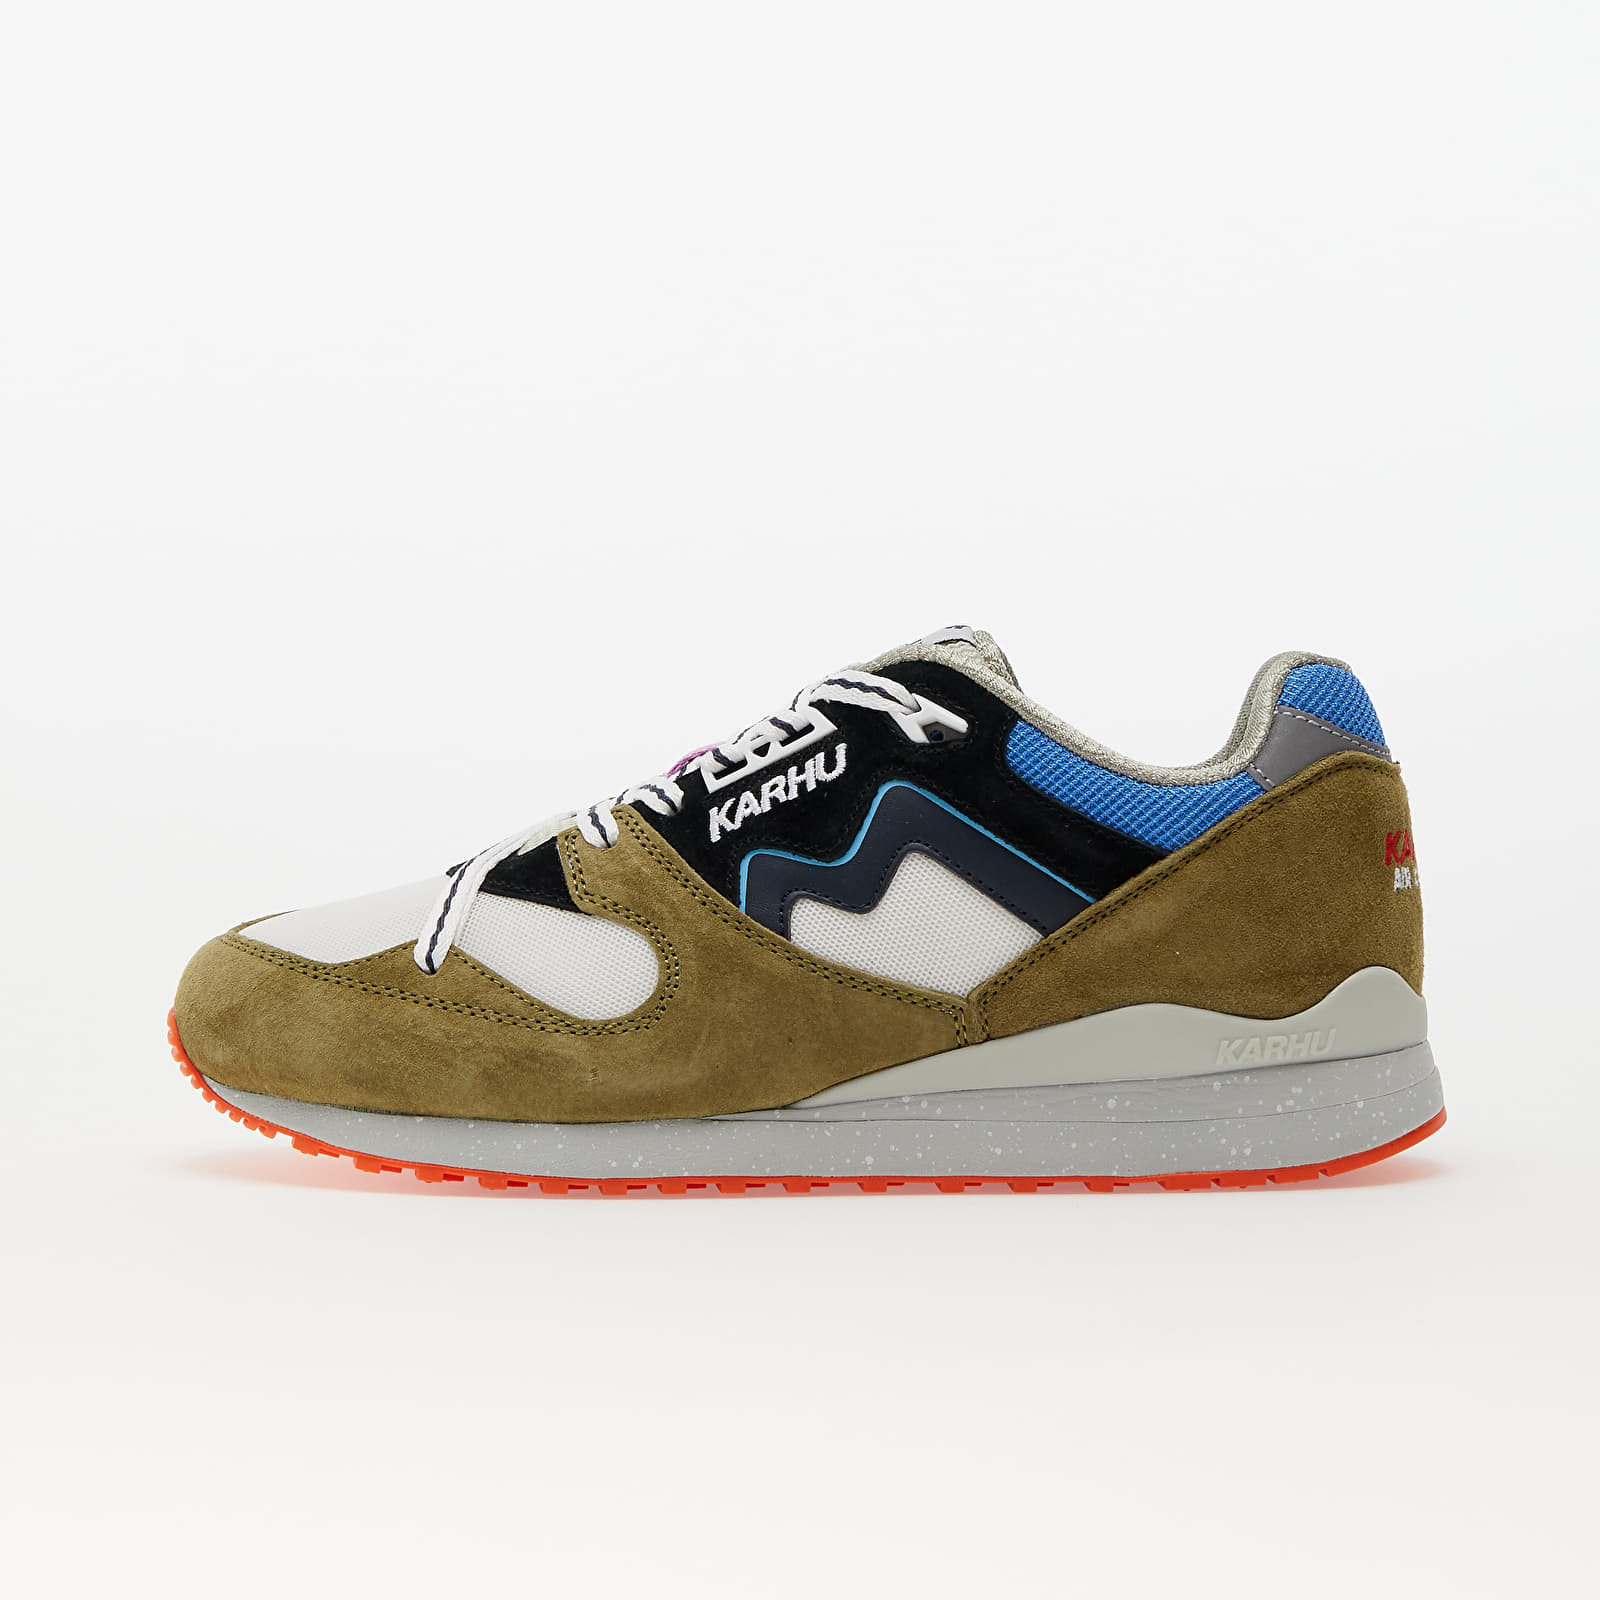 Chaussures et baskets homme Karhu Synchron Classic Green Moss/ India Ink